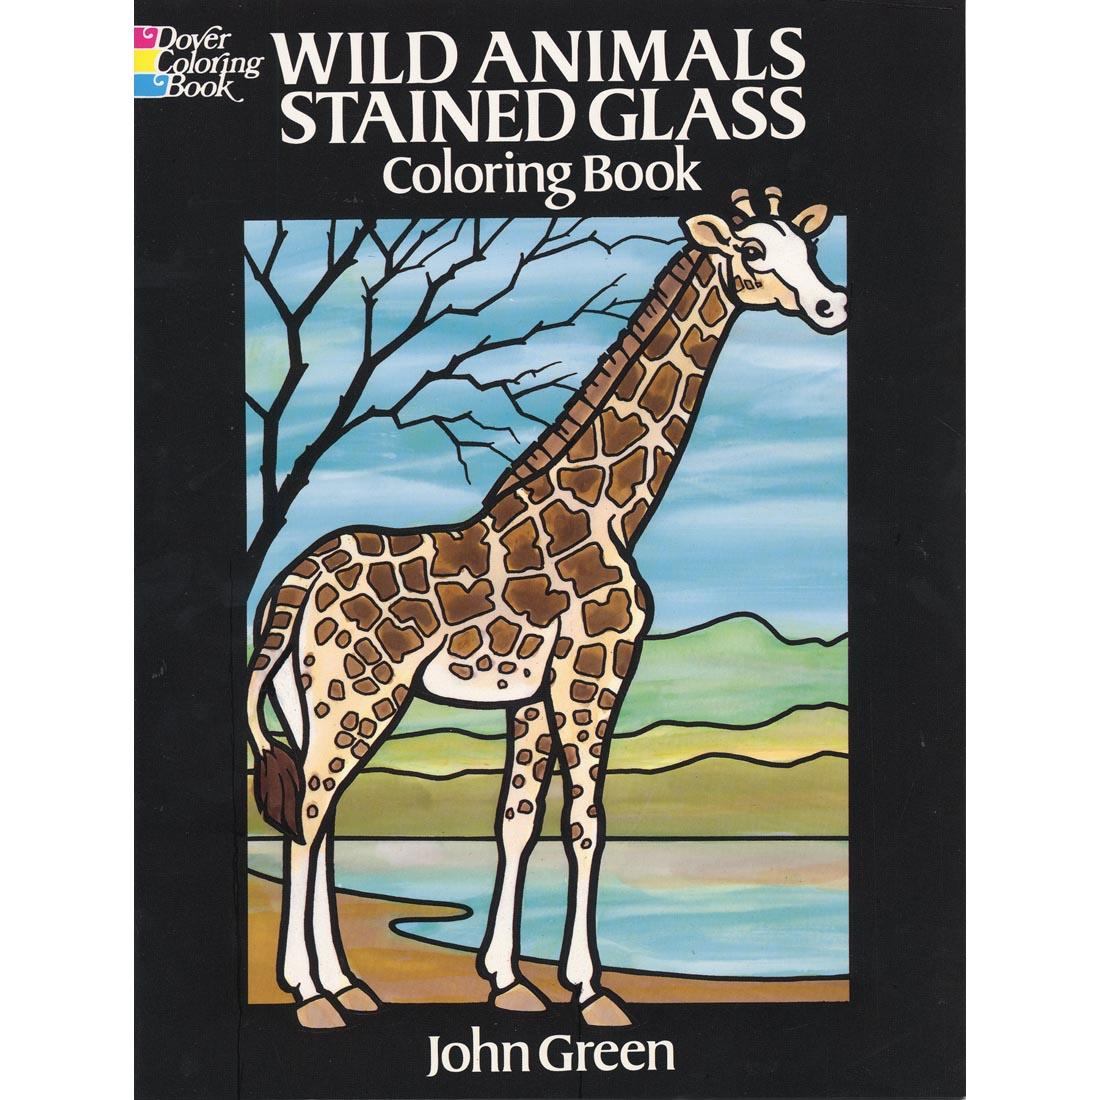 Wild Animals Stained Glass Coloring Book by Dover